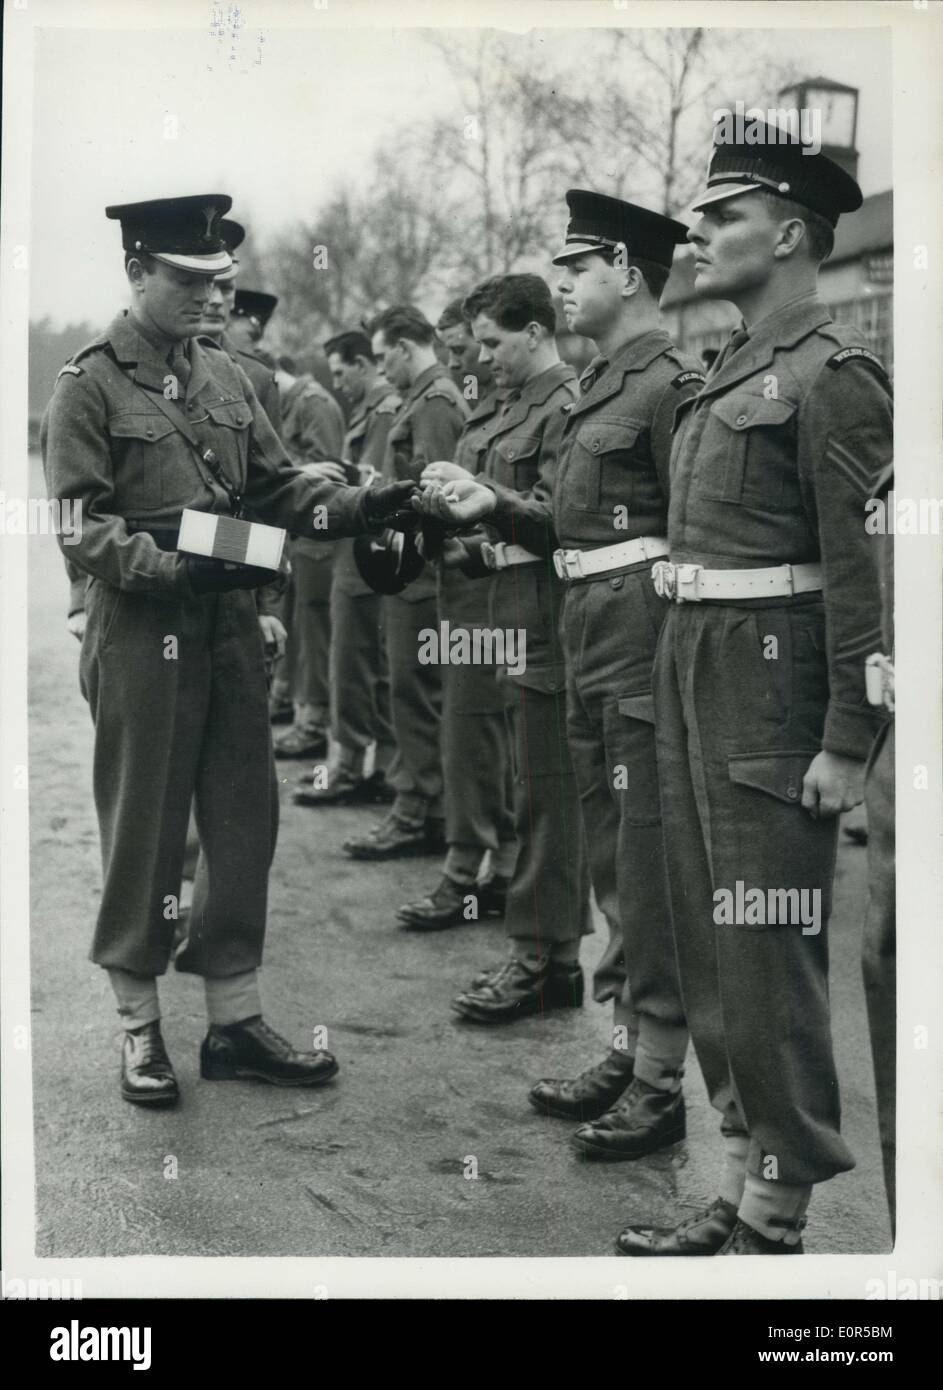 Mar. 01, 1958 - ST. DAVID'S DAY CELEBRATIONS: The 1st.Battalion Welsh Guards today celebrated St. David's Day at Pirbright Camp, Brookwood, Surrey. Major General J.I.R.Moore, CB, CBE., DSO, General Officer Commanding Household Brigade, presented leeks to the Battalion on a parade. Keystone Photo Shows:- Major P.de Zulueta, Commander of No.2 Company, hands out leeks at Pirbright camp today. Stock Photo